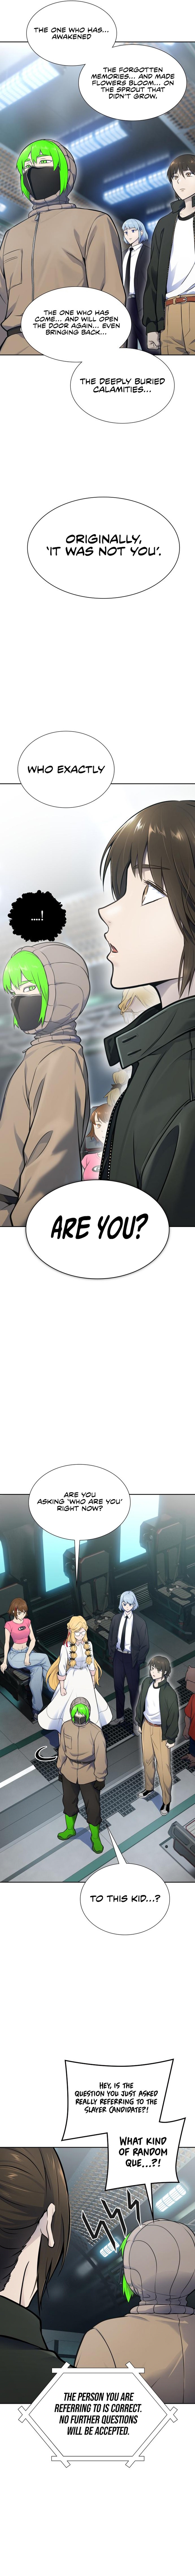 Tower Of God 597 10